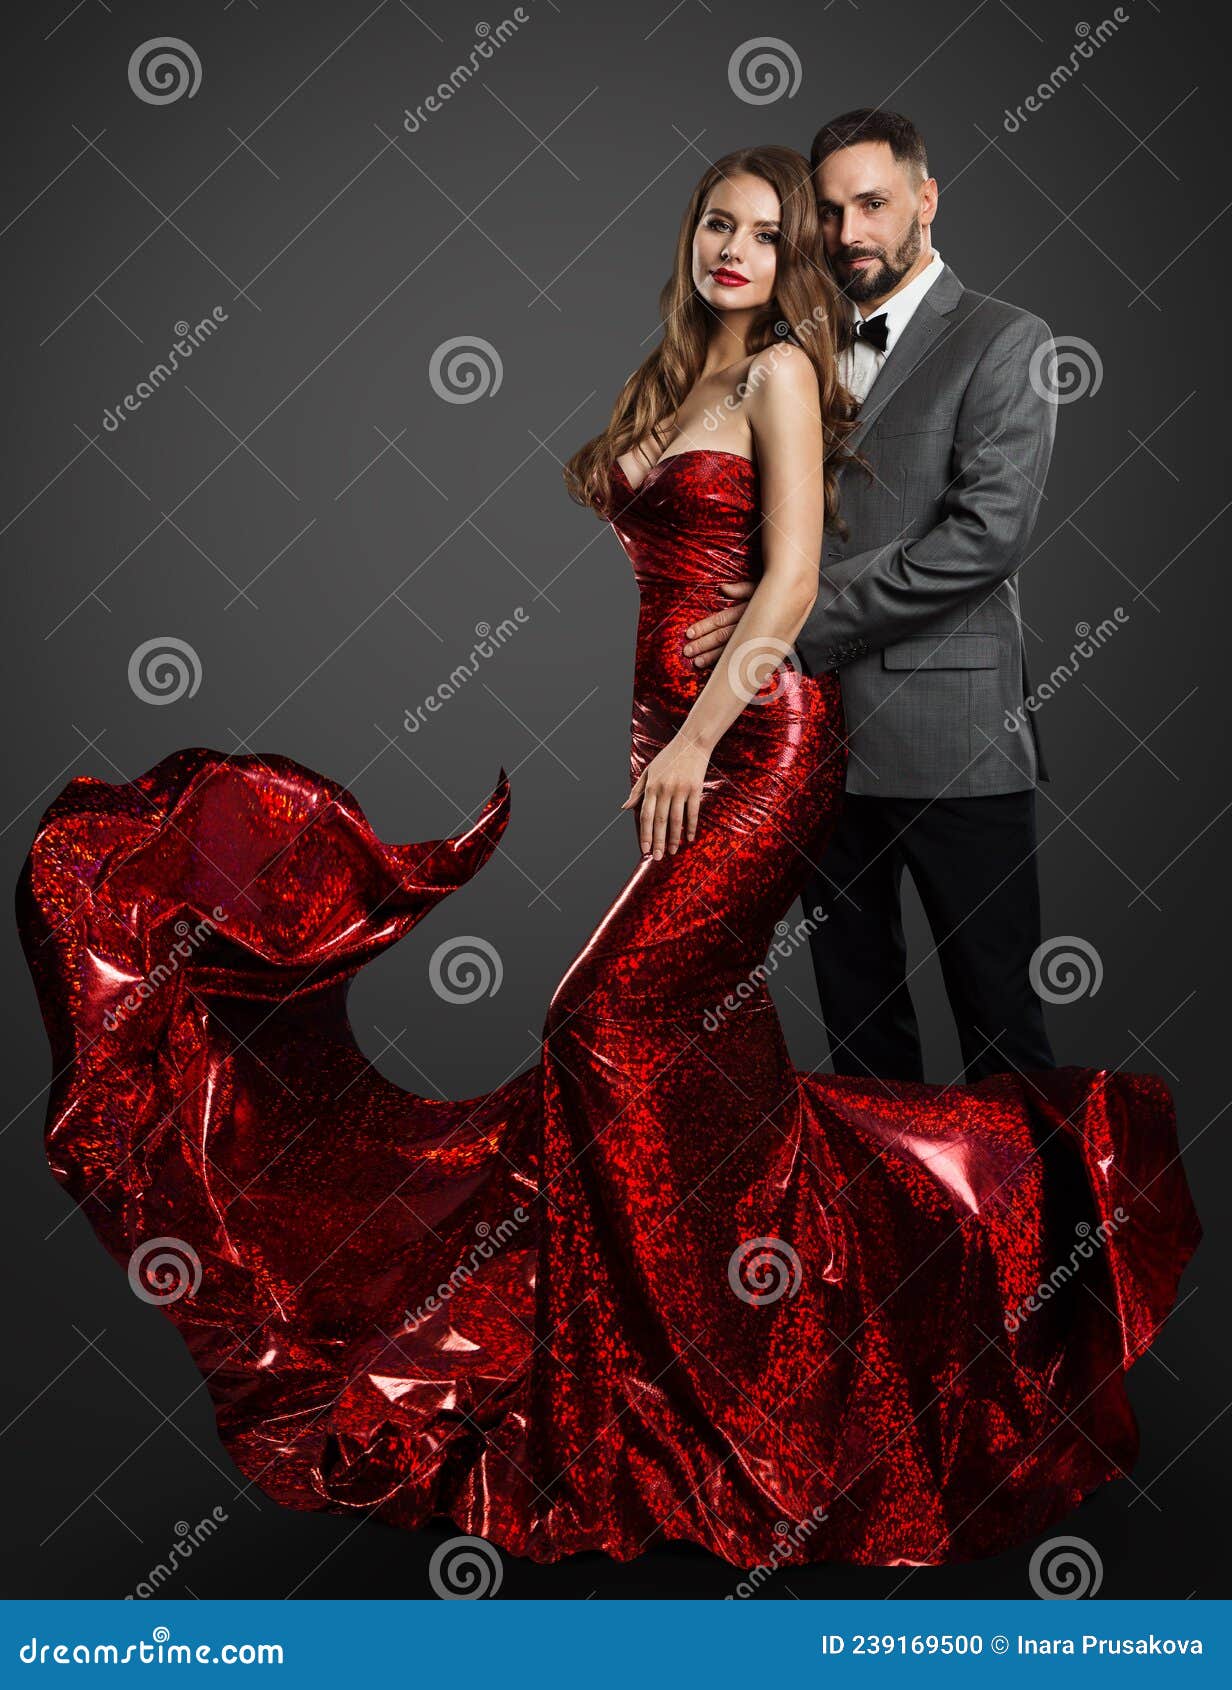 Man in Tuxedo and Woman in Red Dress · Free Stock Photo